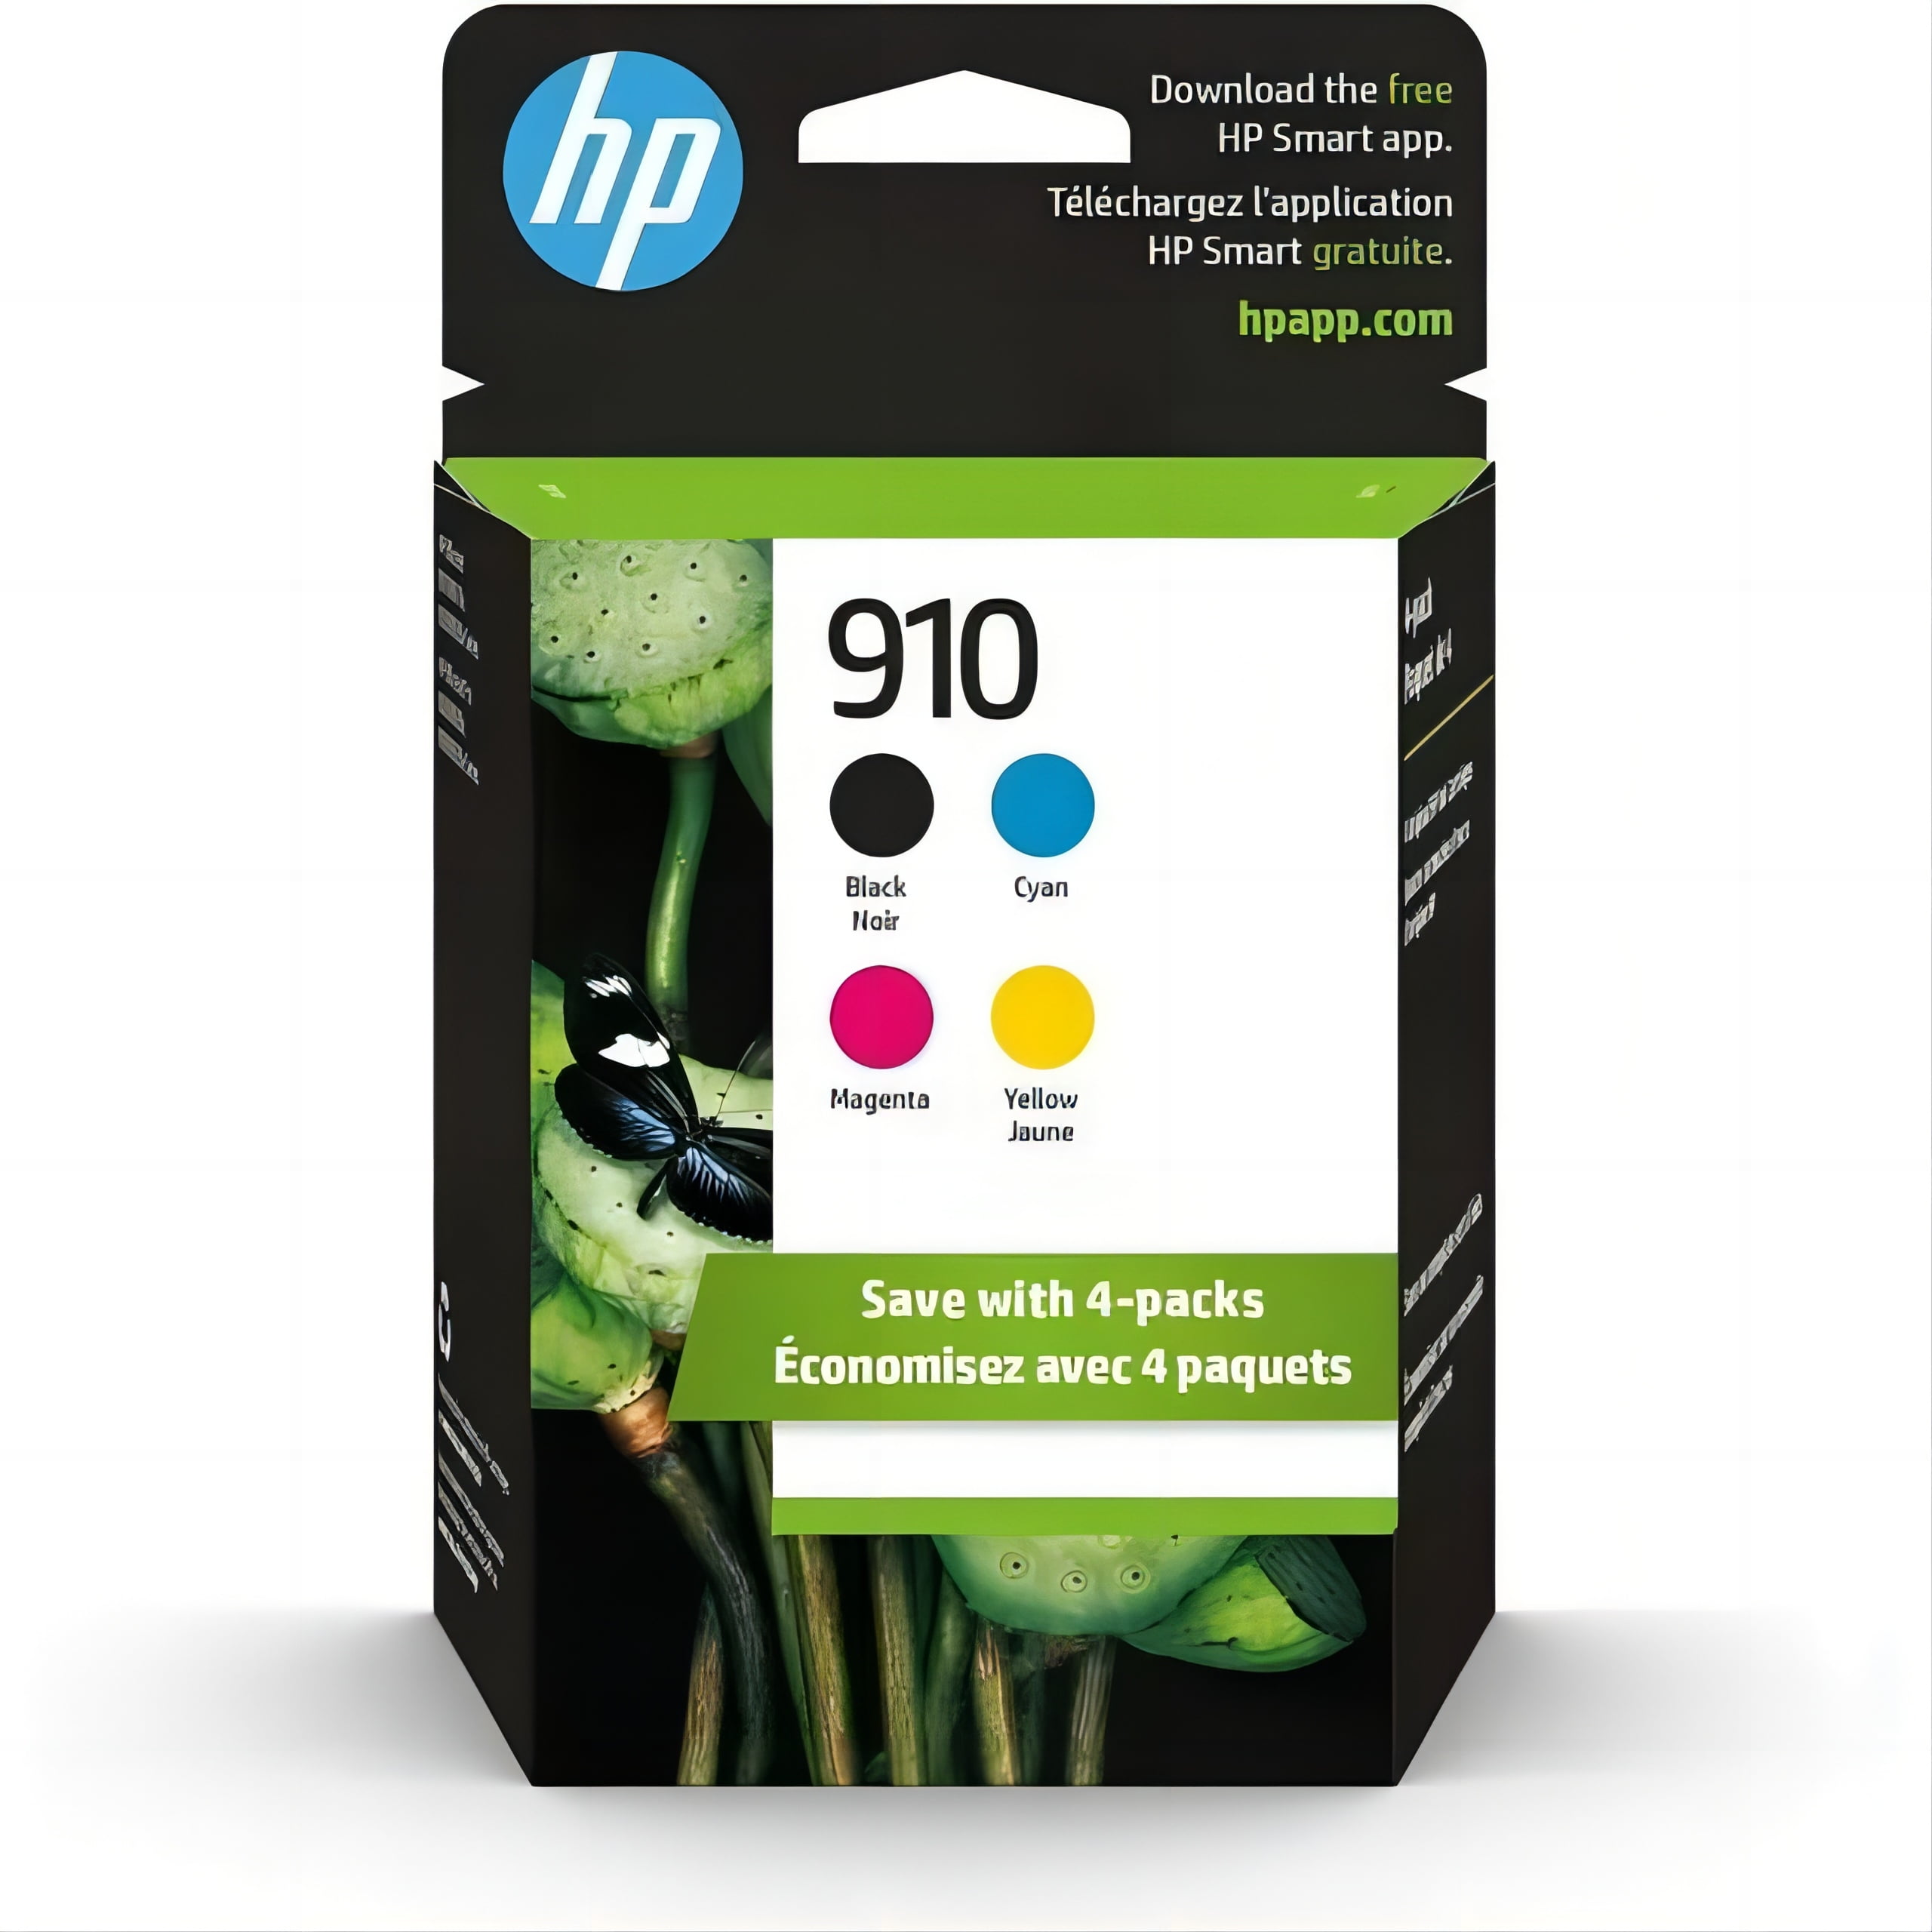 Hp 910 Ink Cartridges With Officejet 8025e 8035e 8025 8035 8028 8022 8015 4 Pack 3yl65an 4057